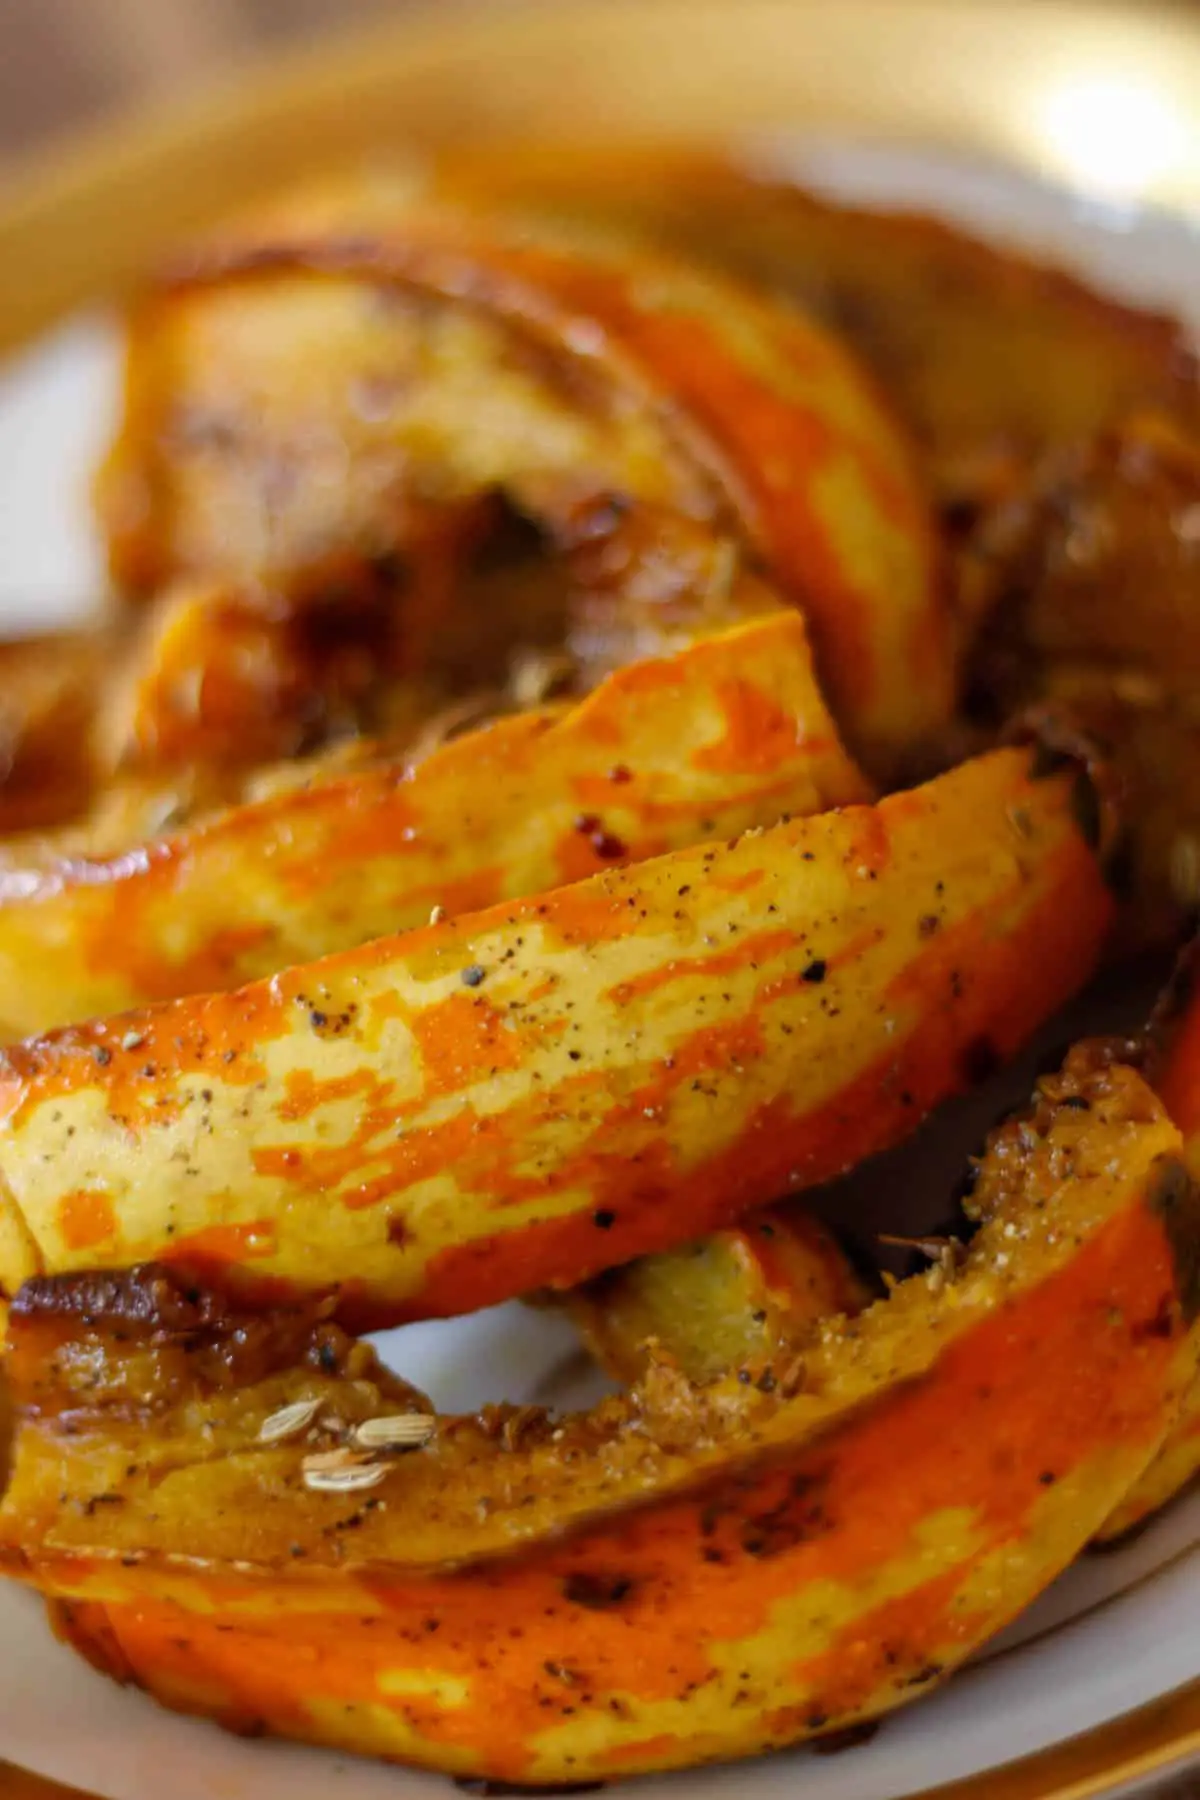 Wedges of carnival squash in a white gold rimmed bowl with fennel seeds and balsamic vinegar.